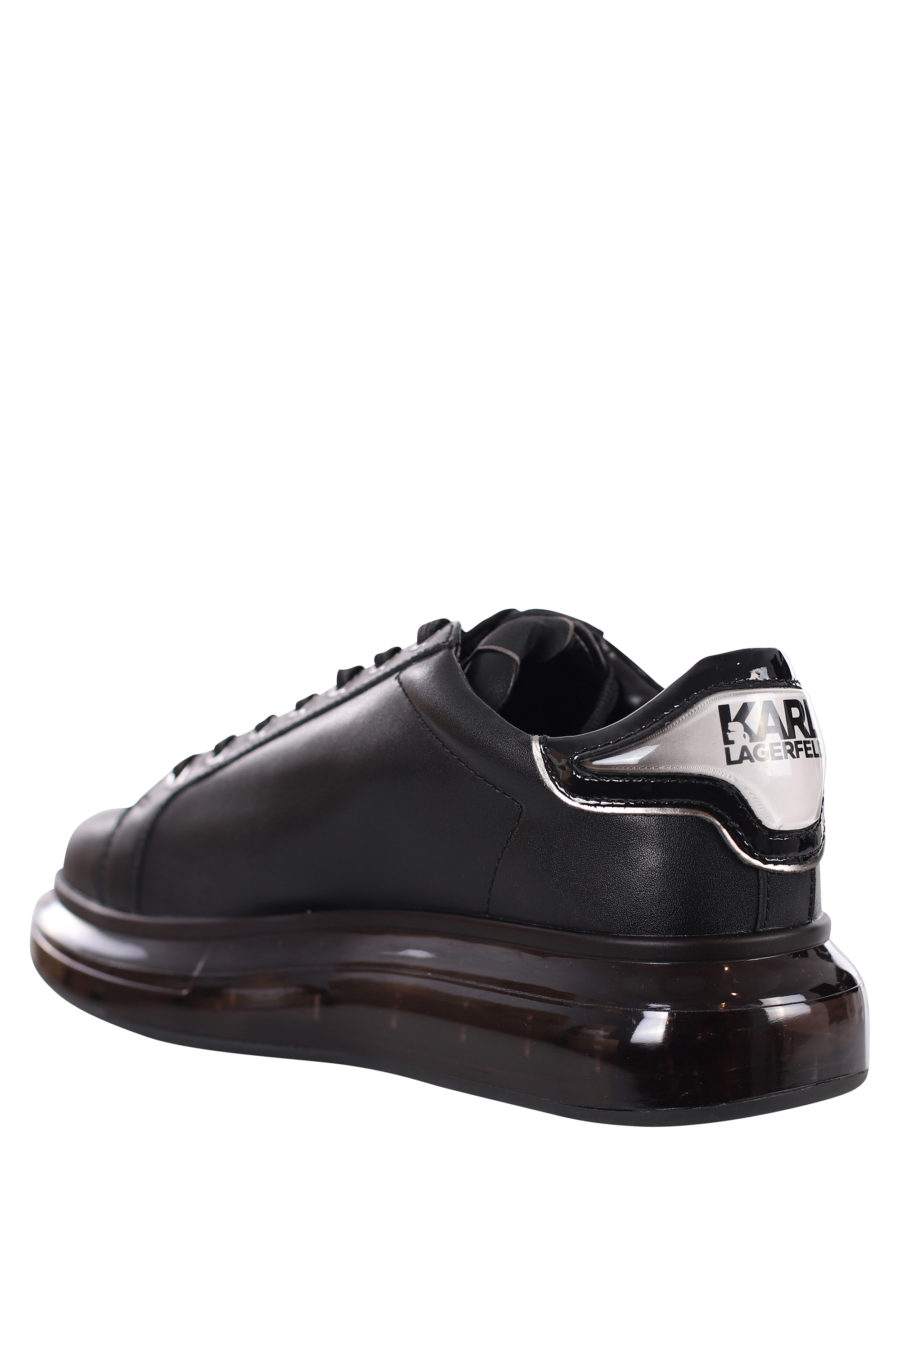 Black trainers with black silhouette logo and black sole - IMG 0417